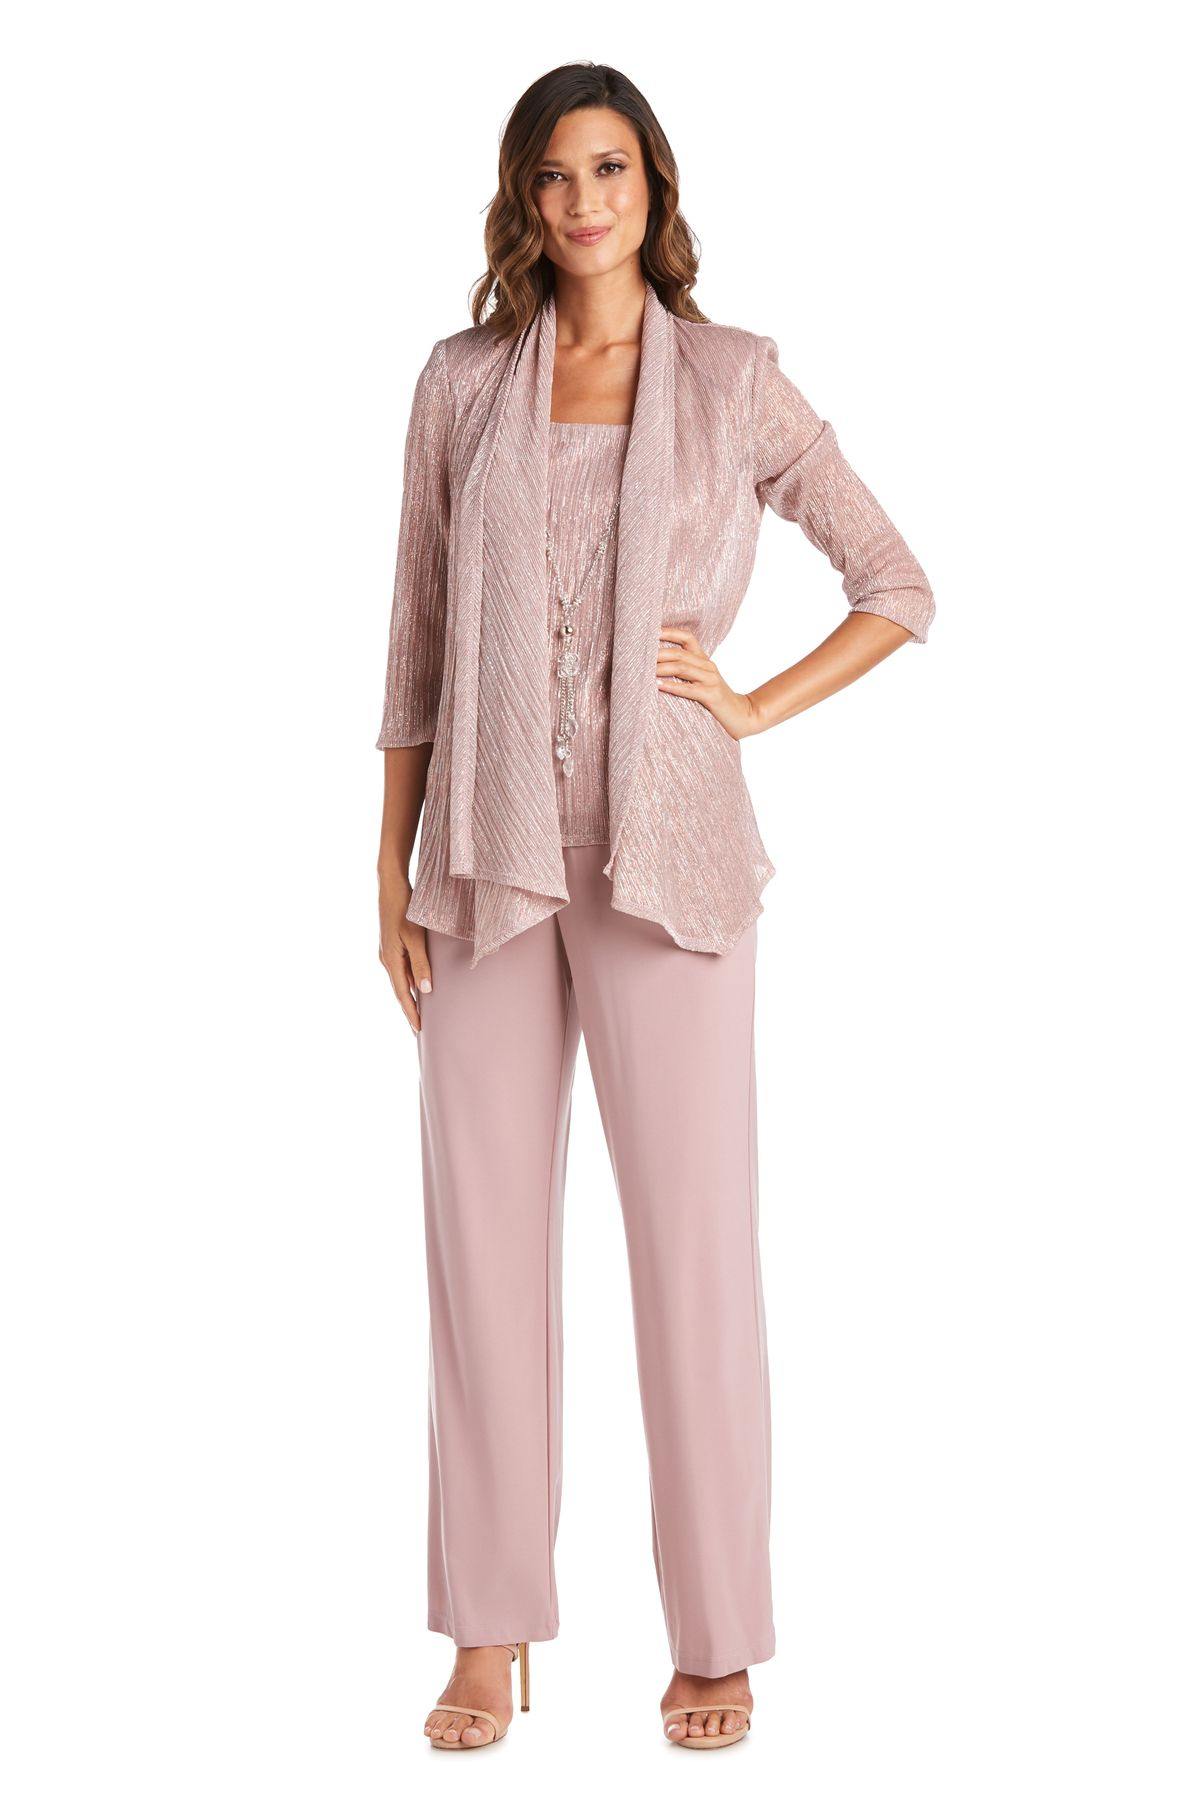 R&M Richards Mother of the Bride Pansuit 7171 - The Dress Outlet